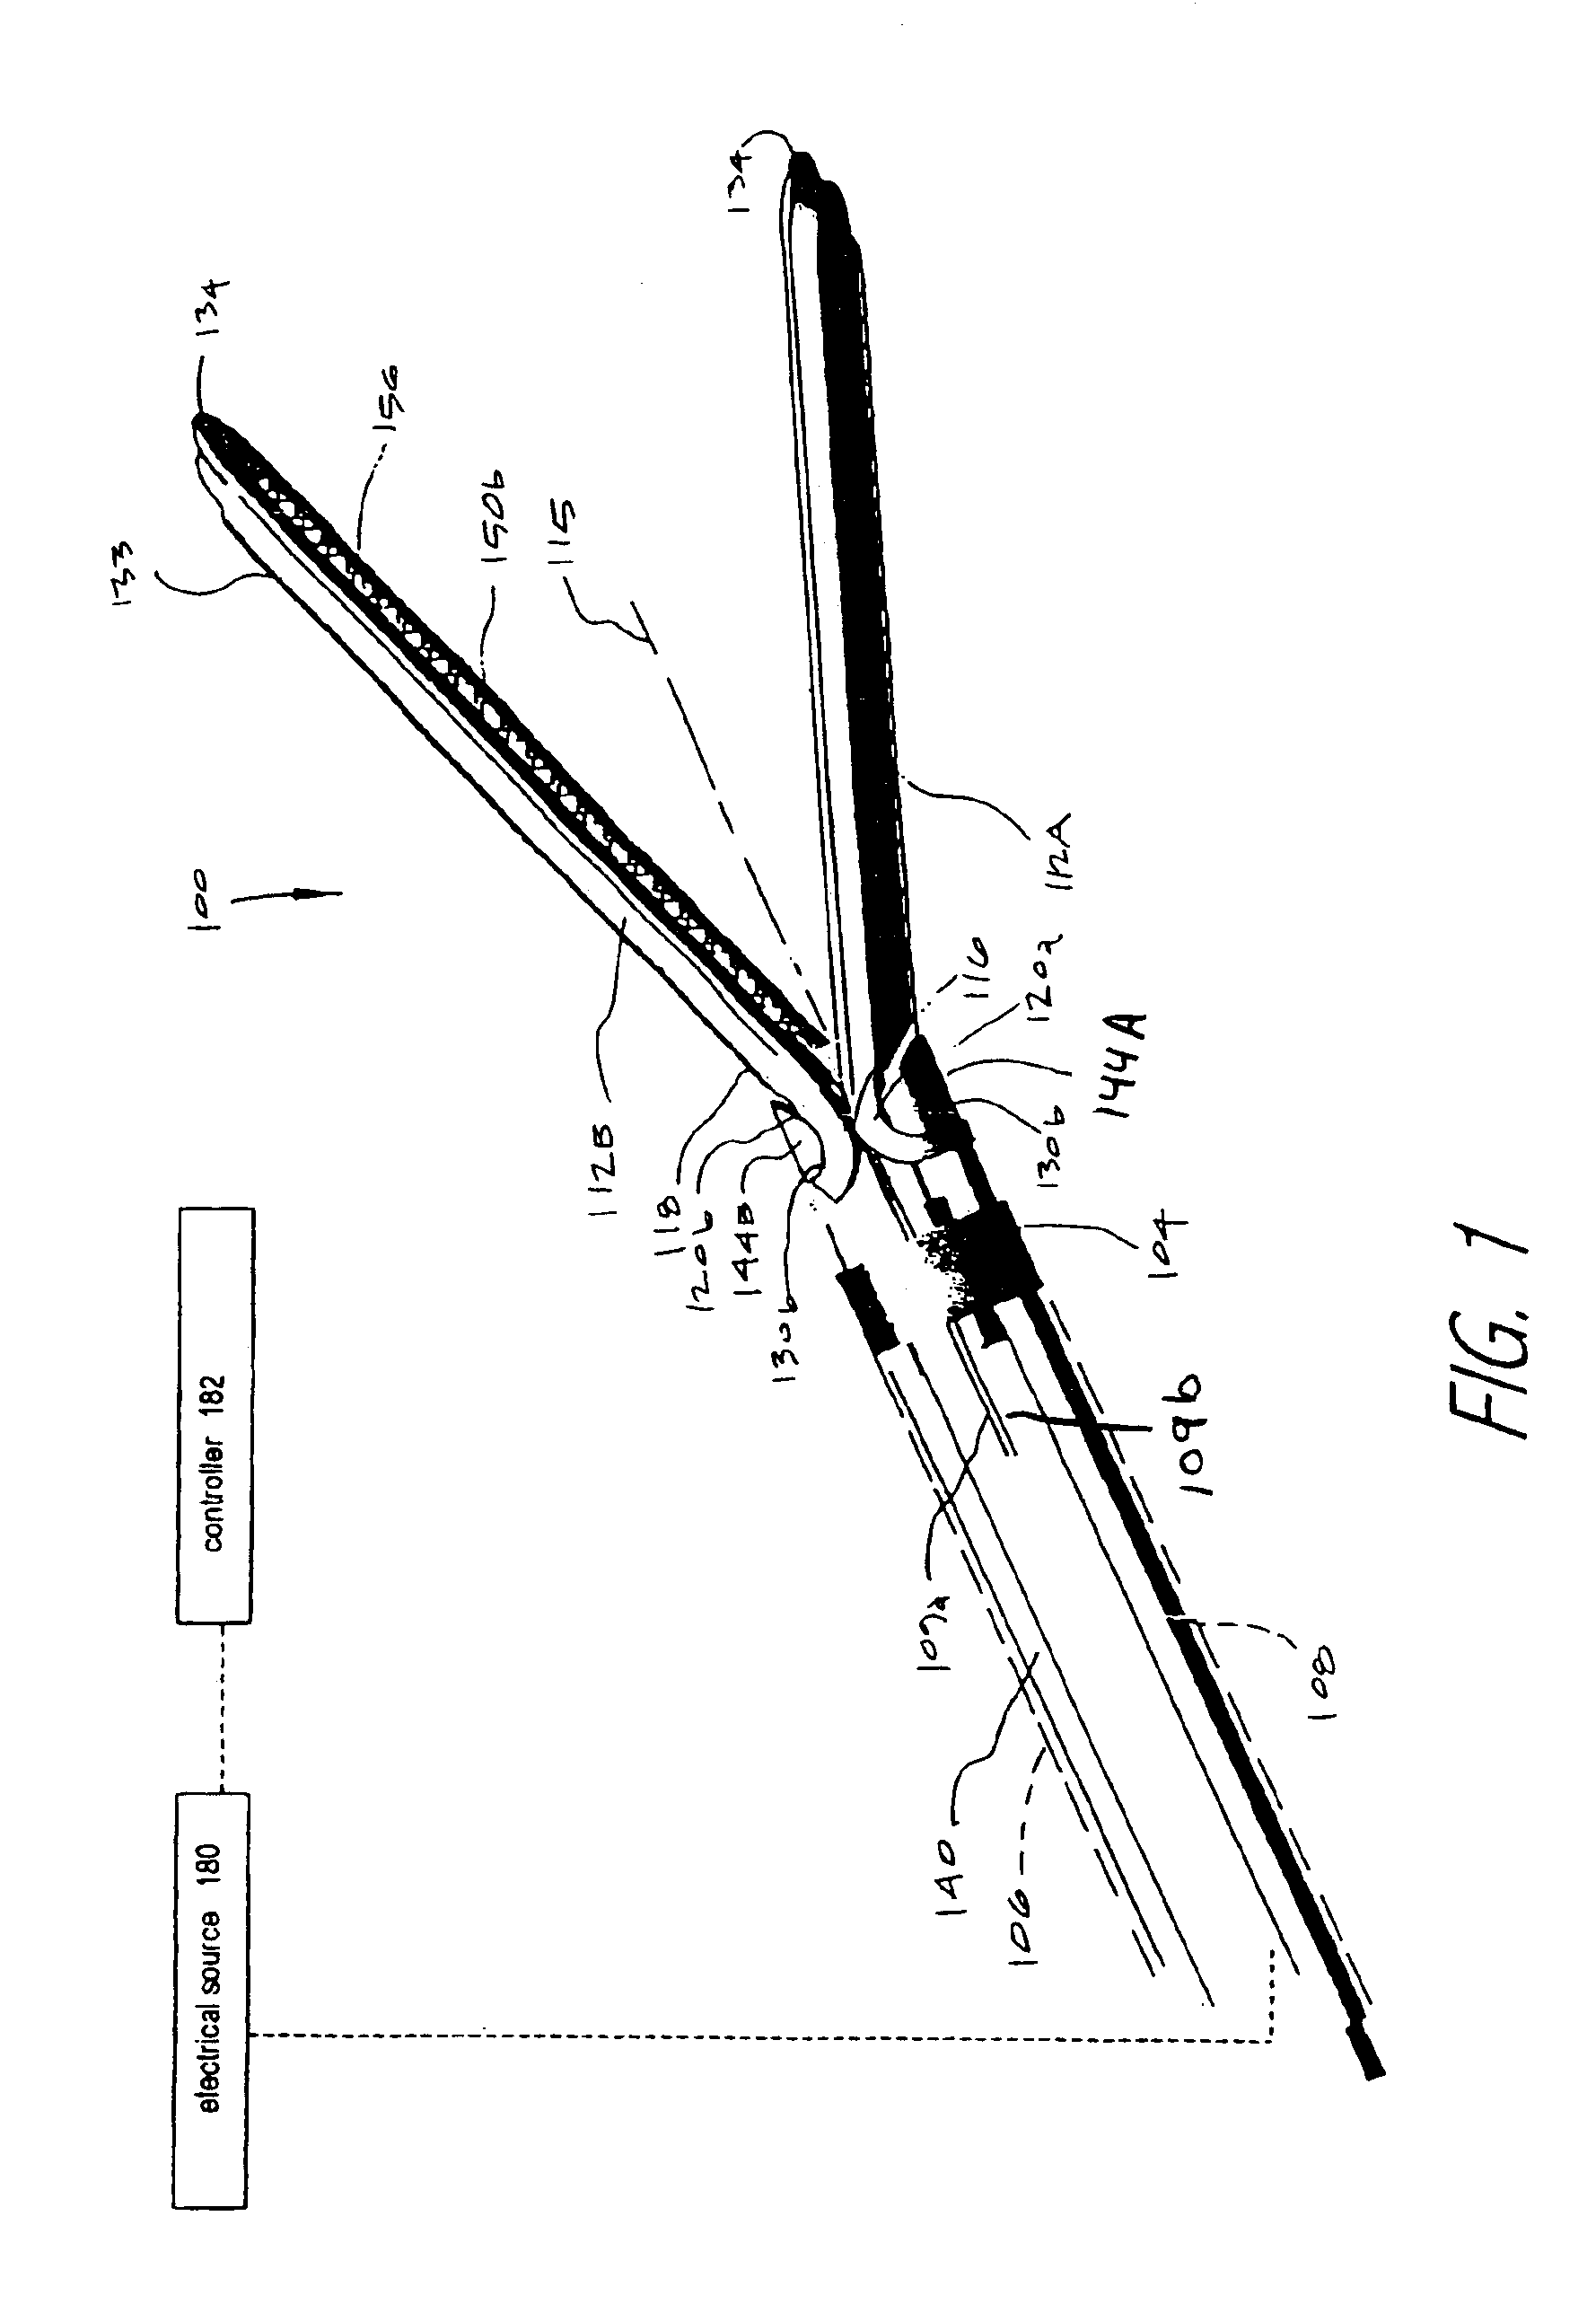 Jaw structure for electrosurgical instrument